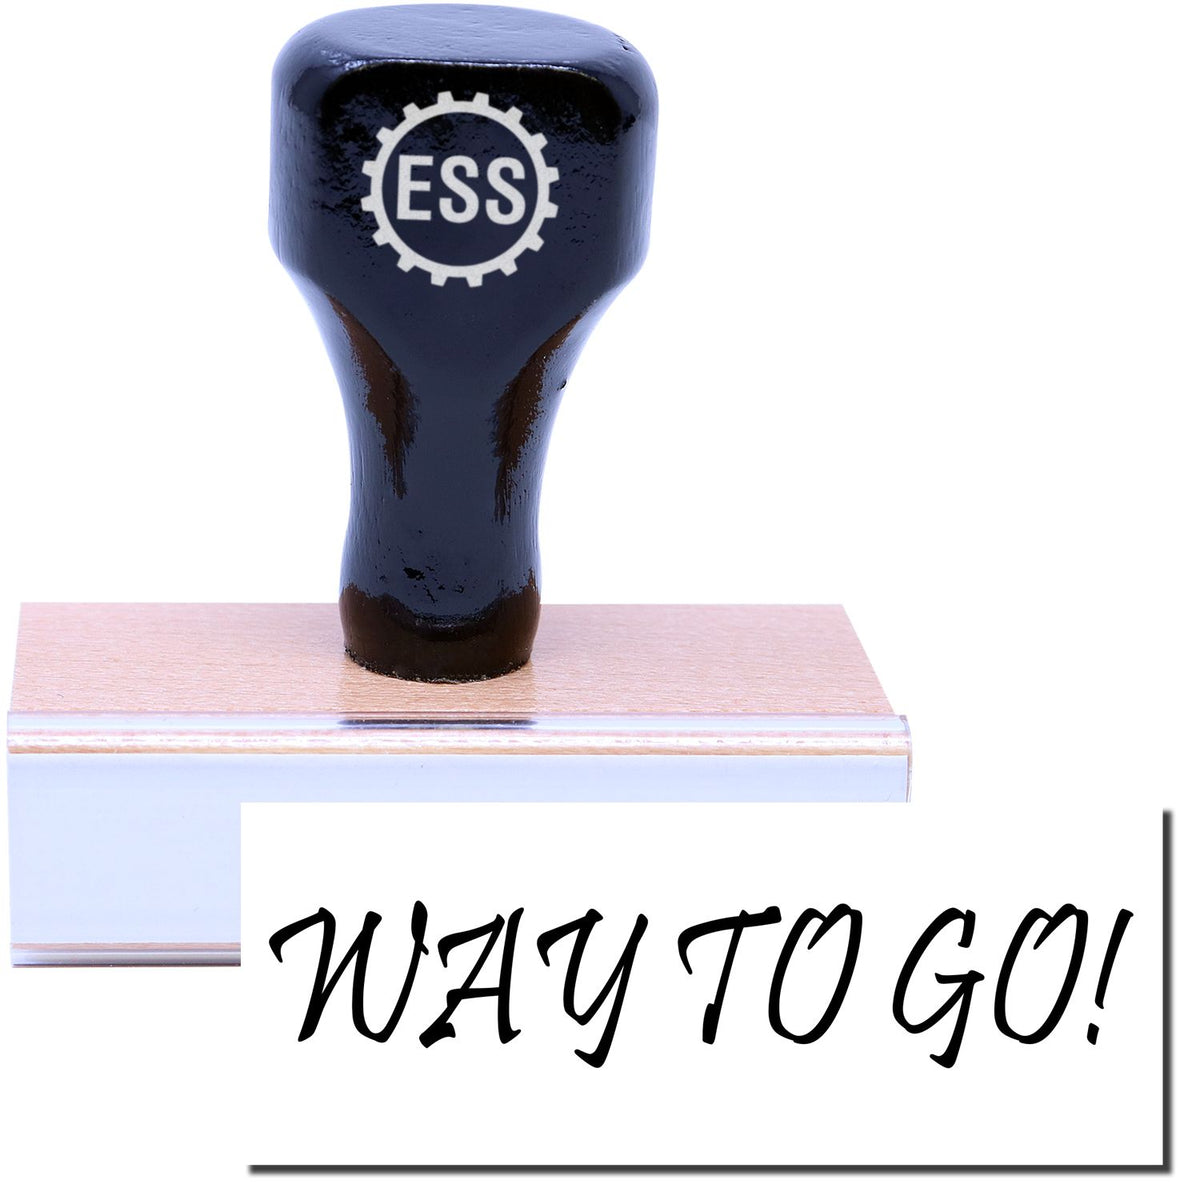 A stock office rubber stamp with a stamped image showing how the text &quot;WAY TO GO!&quot; in a large font is displayed after stamping.